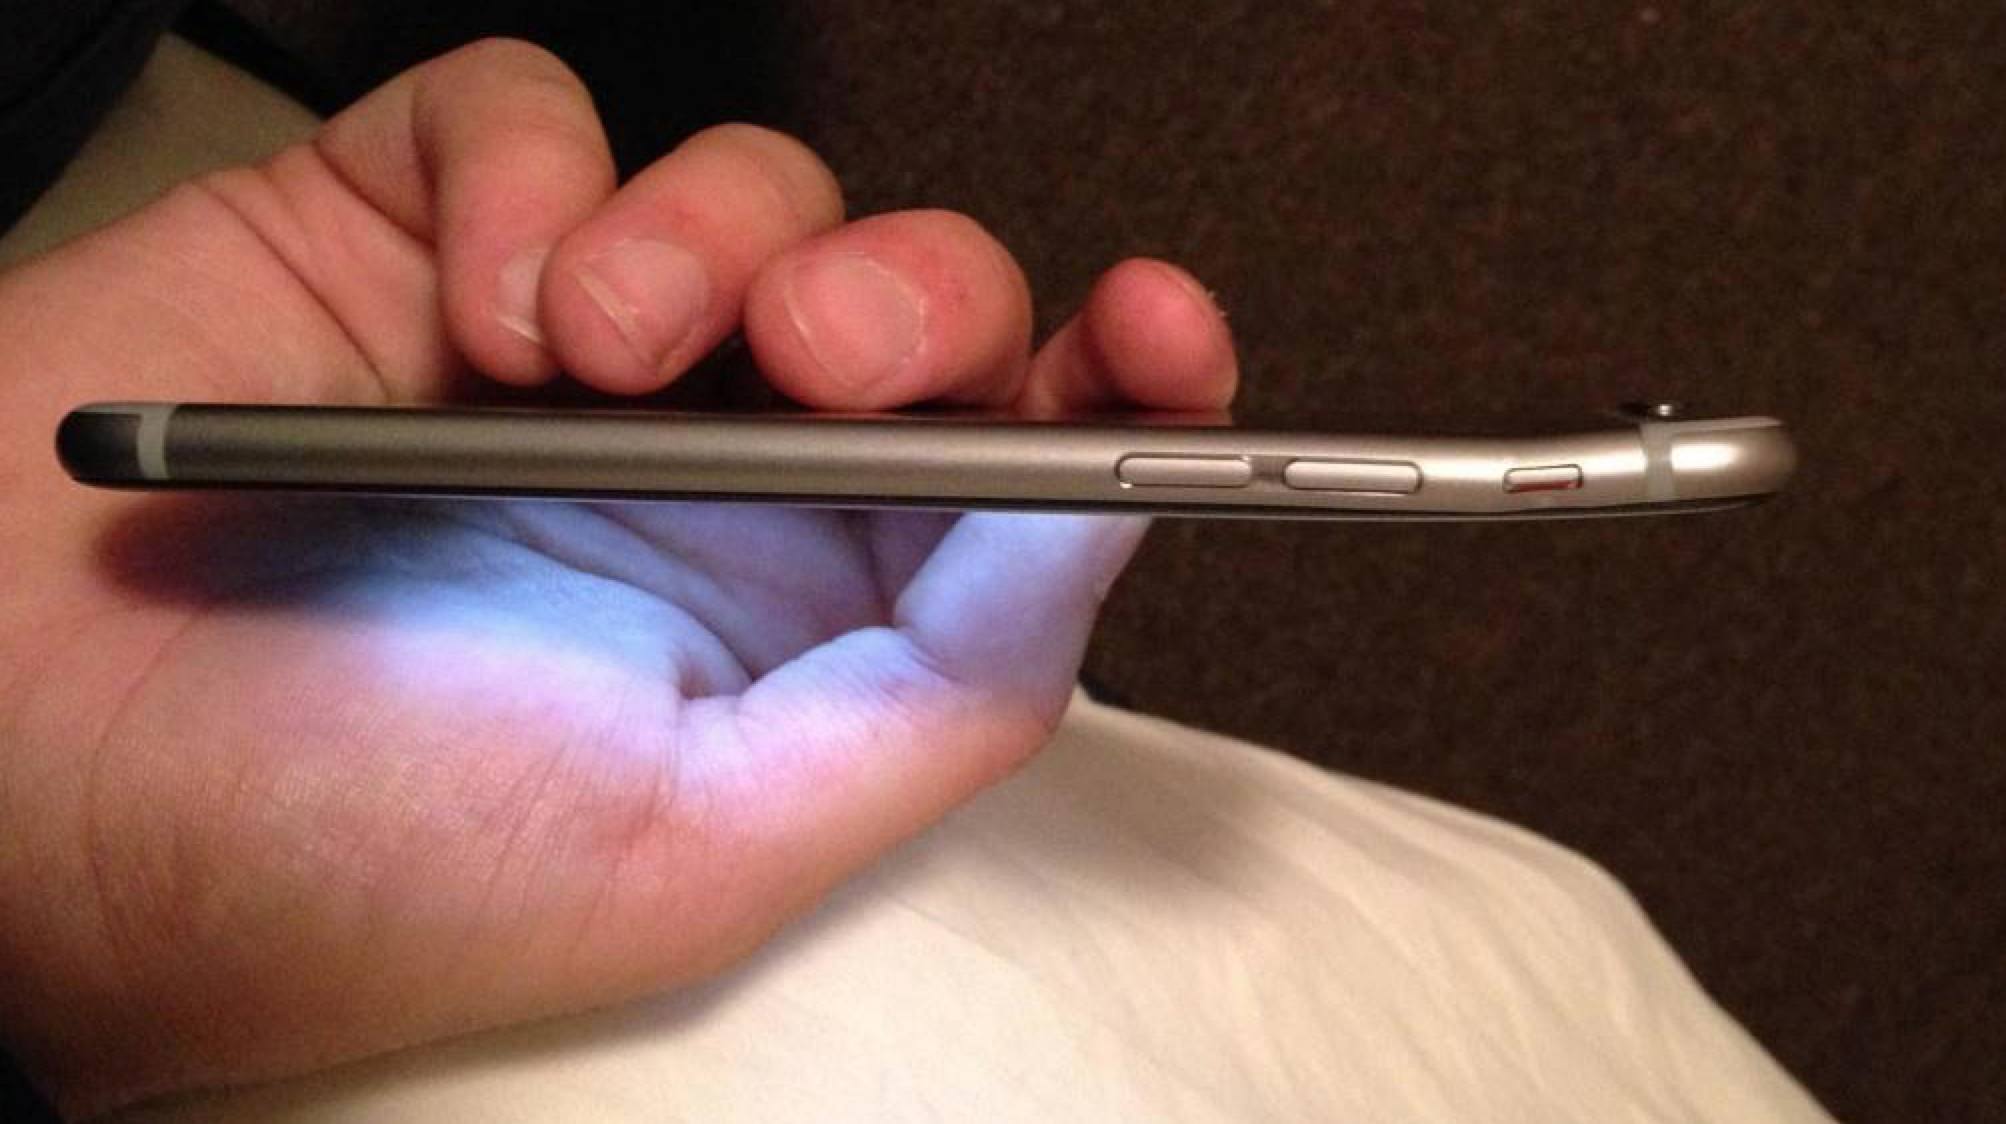 How Durable Is The Bendy iPhone 6 Compared To Other New Devices? The Results Will Leave You Speechless!